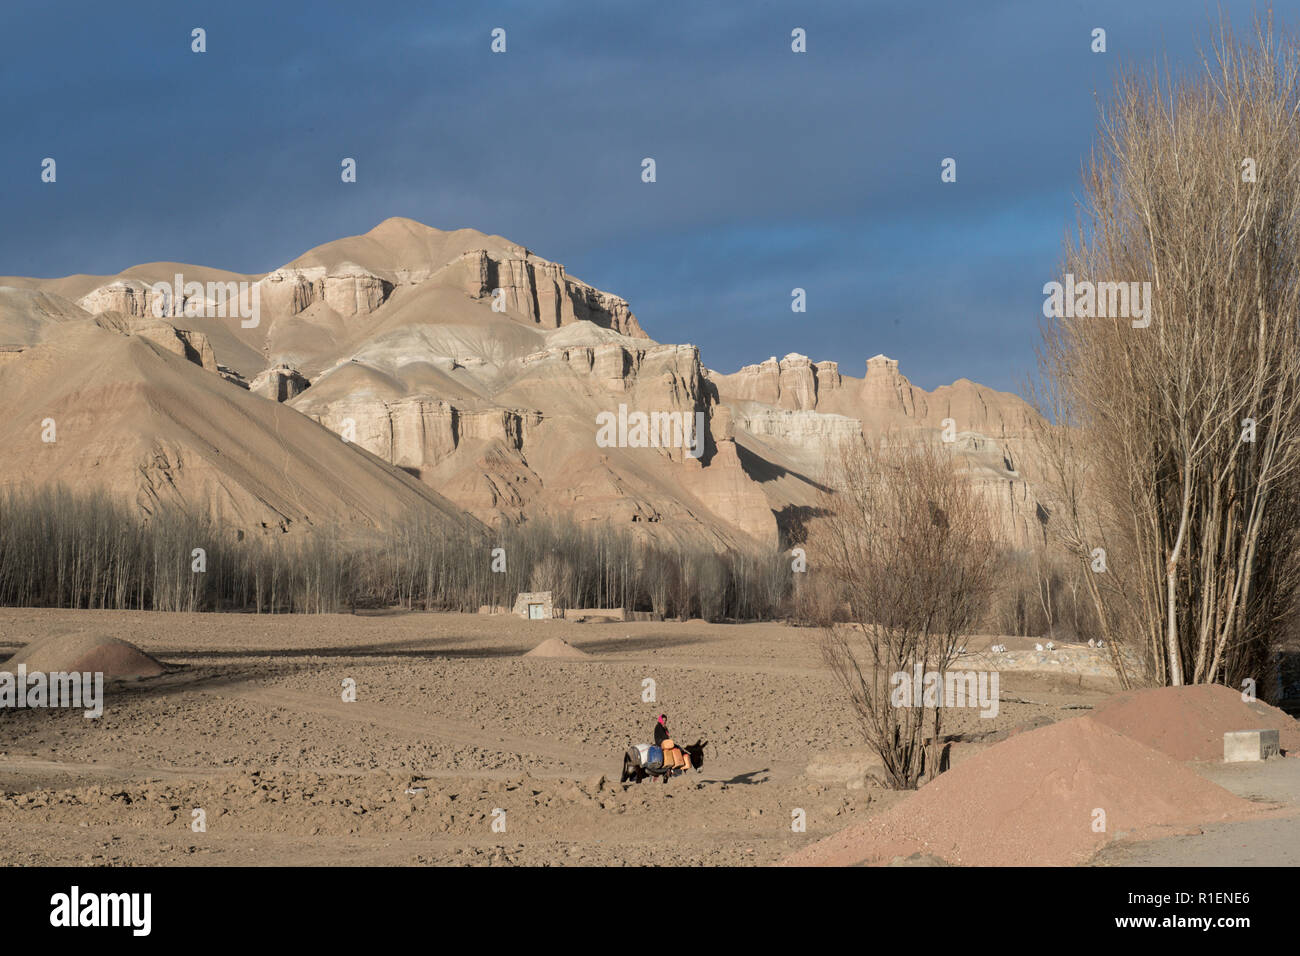 Villager Carrying Water Jerrycans On A Donkey At Sunset, With Trees And Dry Brown Mountains In The Background, Bamyan Province, Afghanistan Stock Photo